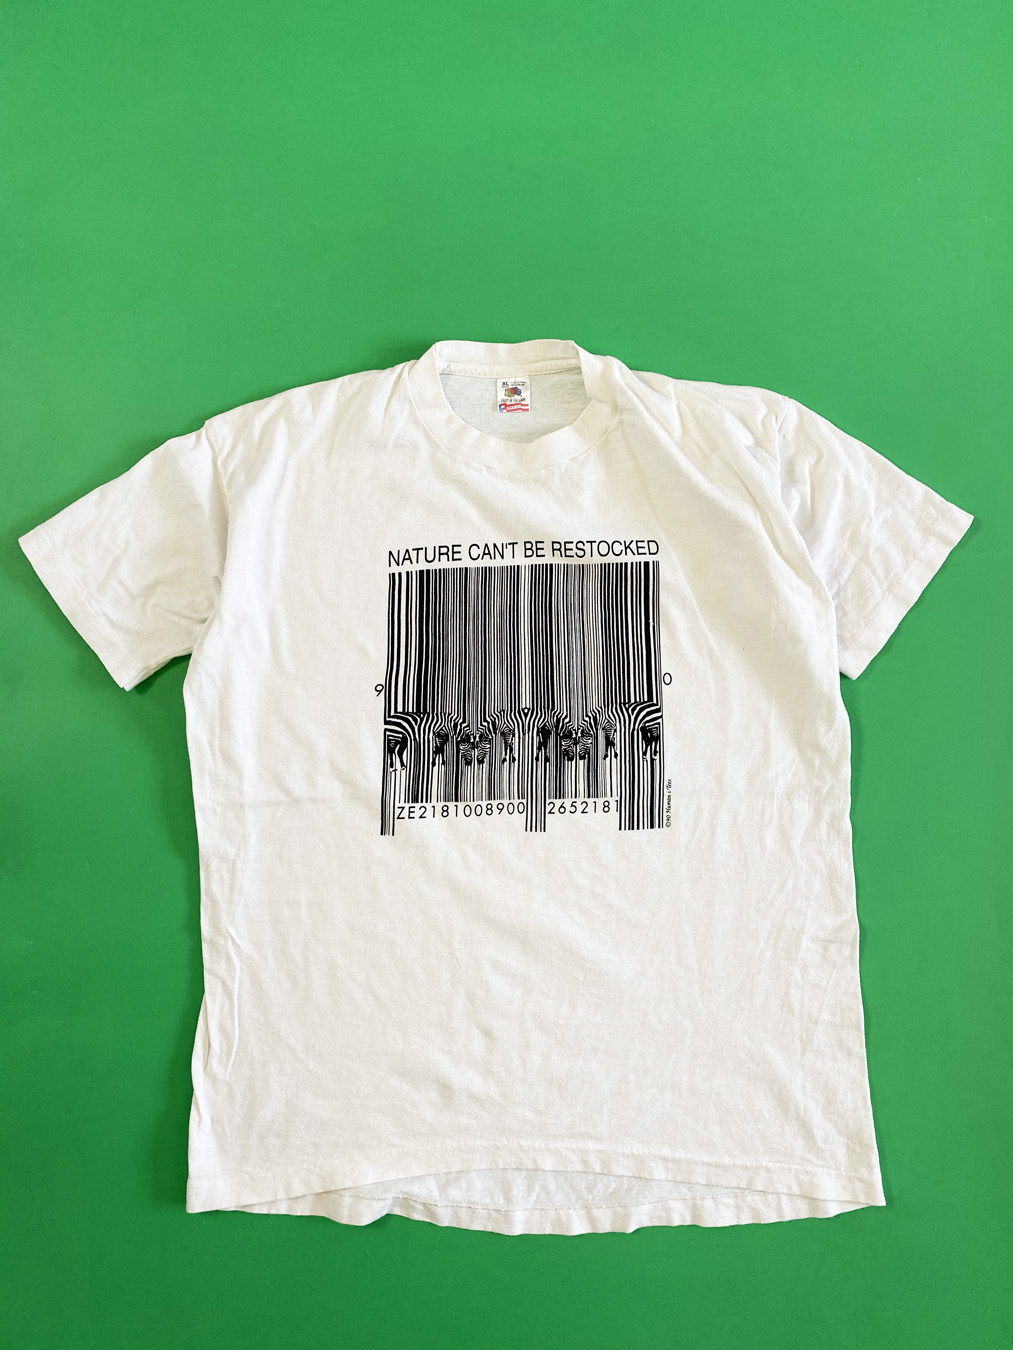 90s NATURE CAN'T BE RESTOCKED Tシャツ XL